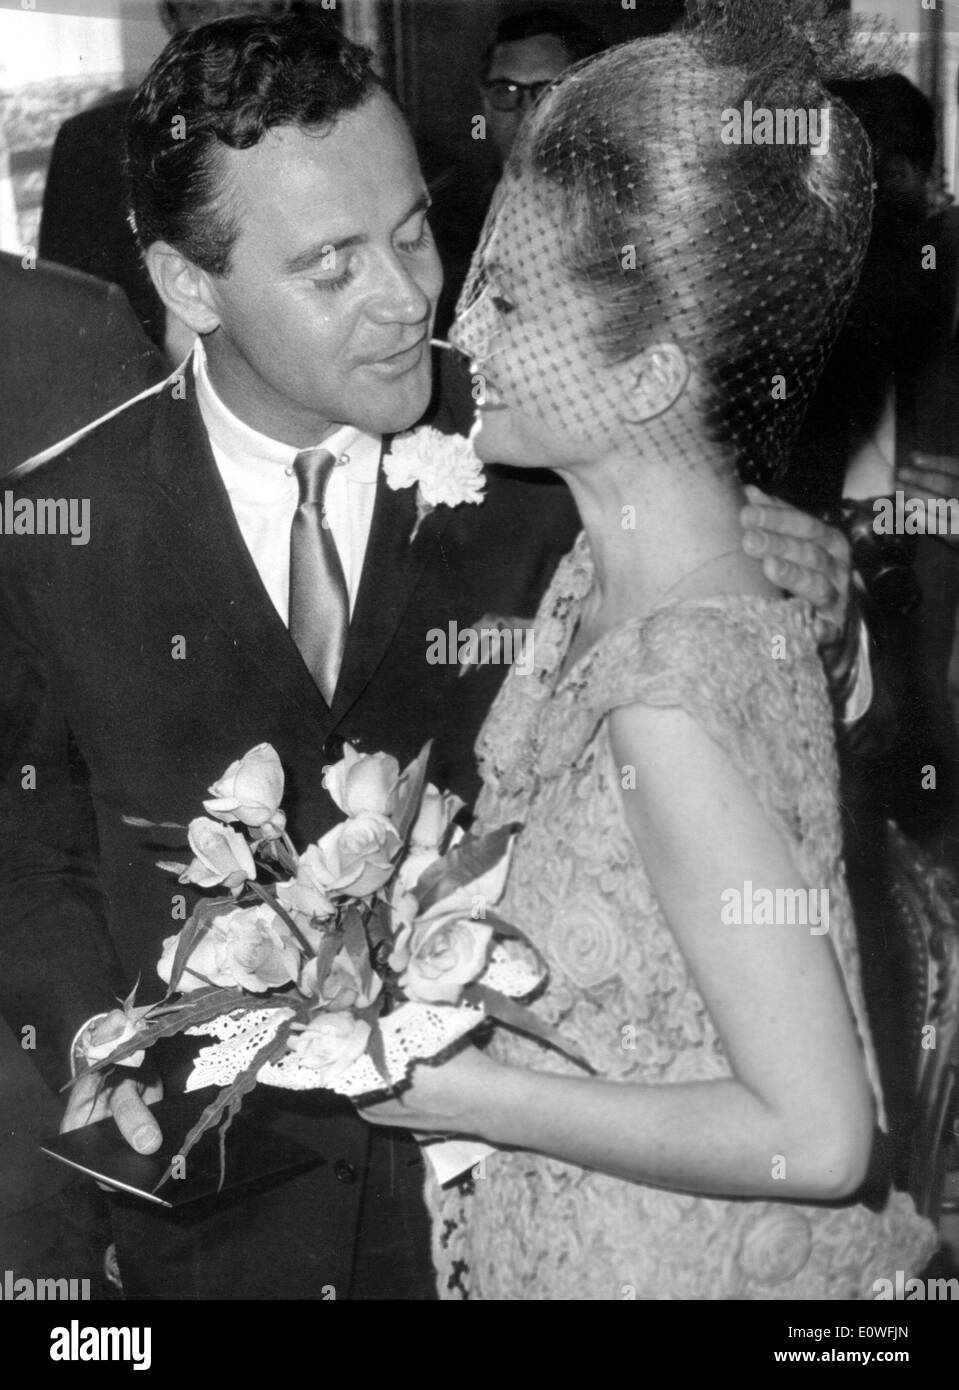 Jack Lemmon and Felicia Farr at their wedding ceremony Stock Photo